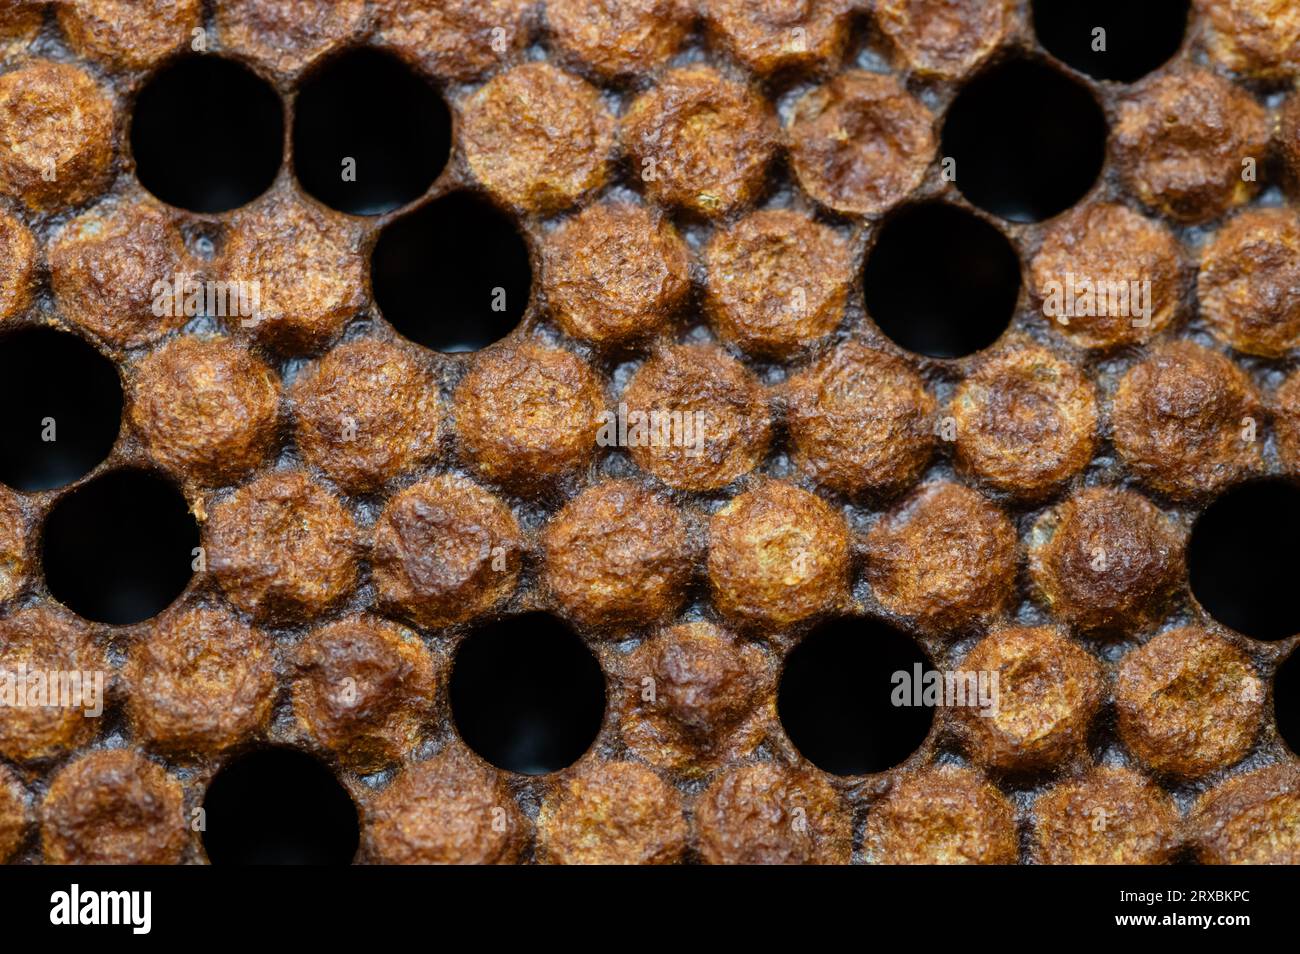 Capped honey bee brood with empty cells interspersed Stock Photo